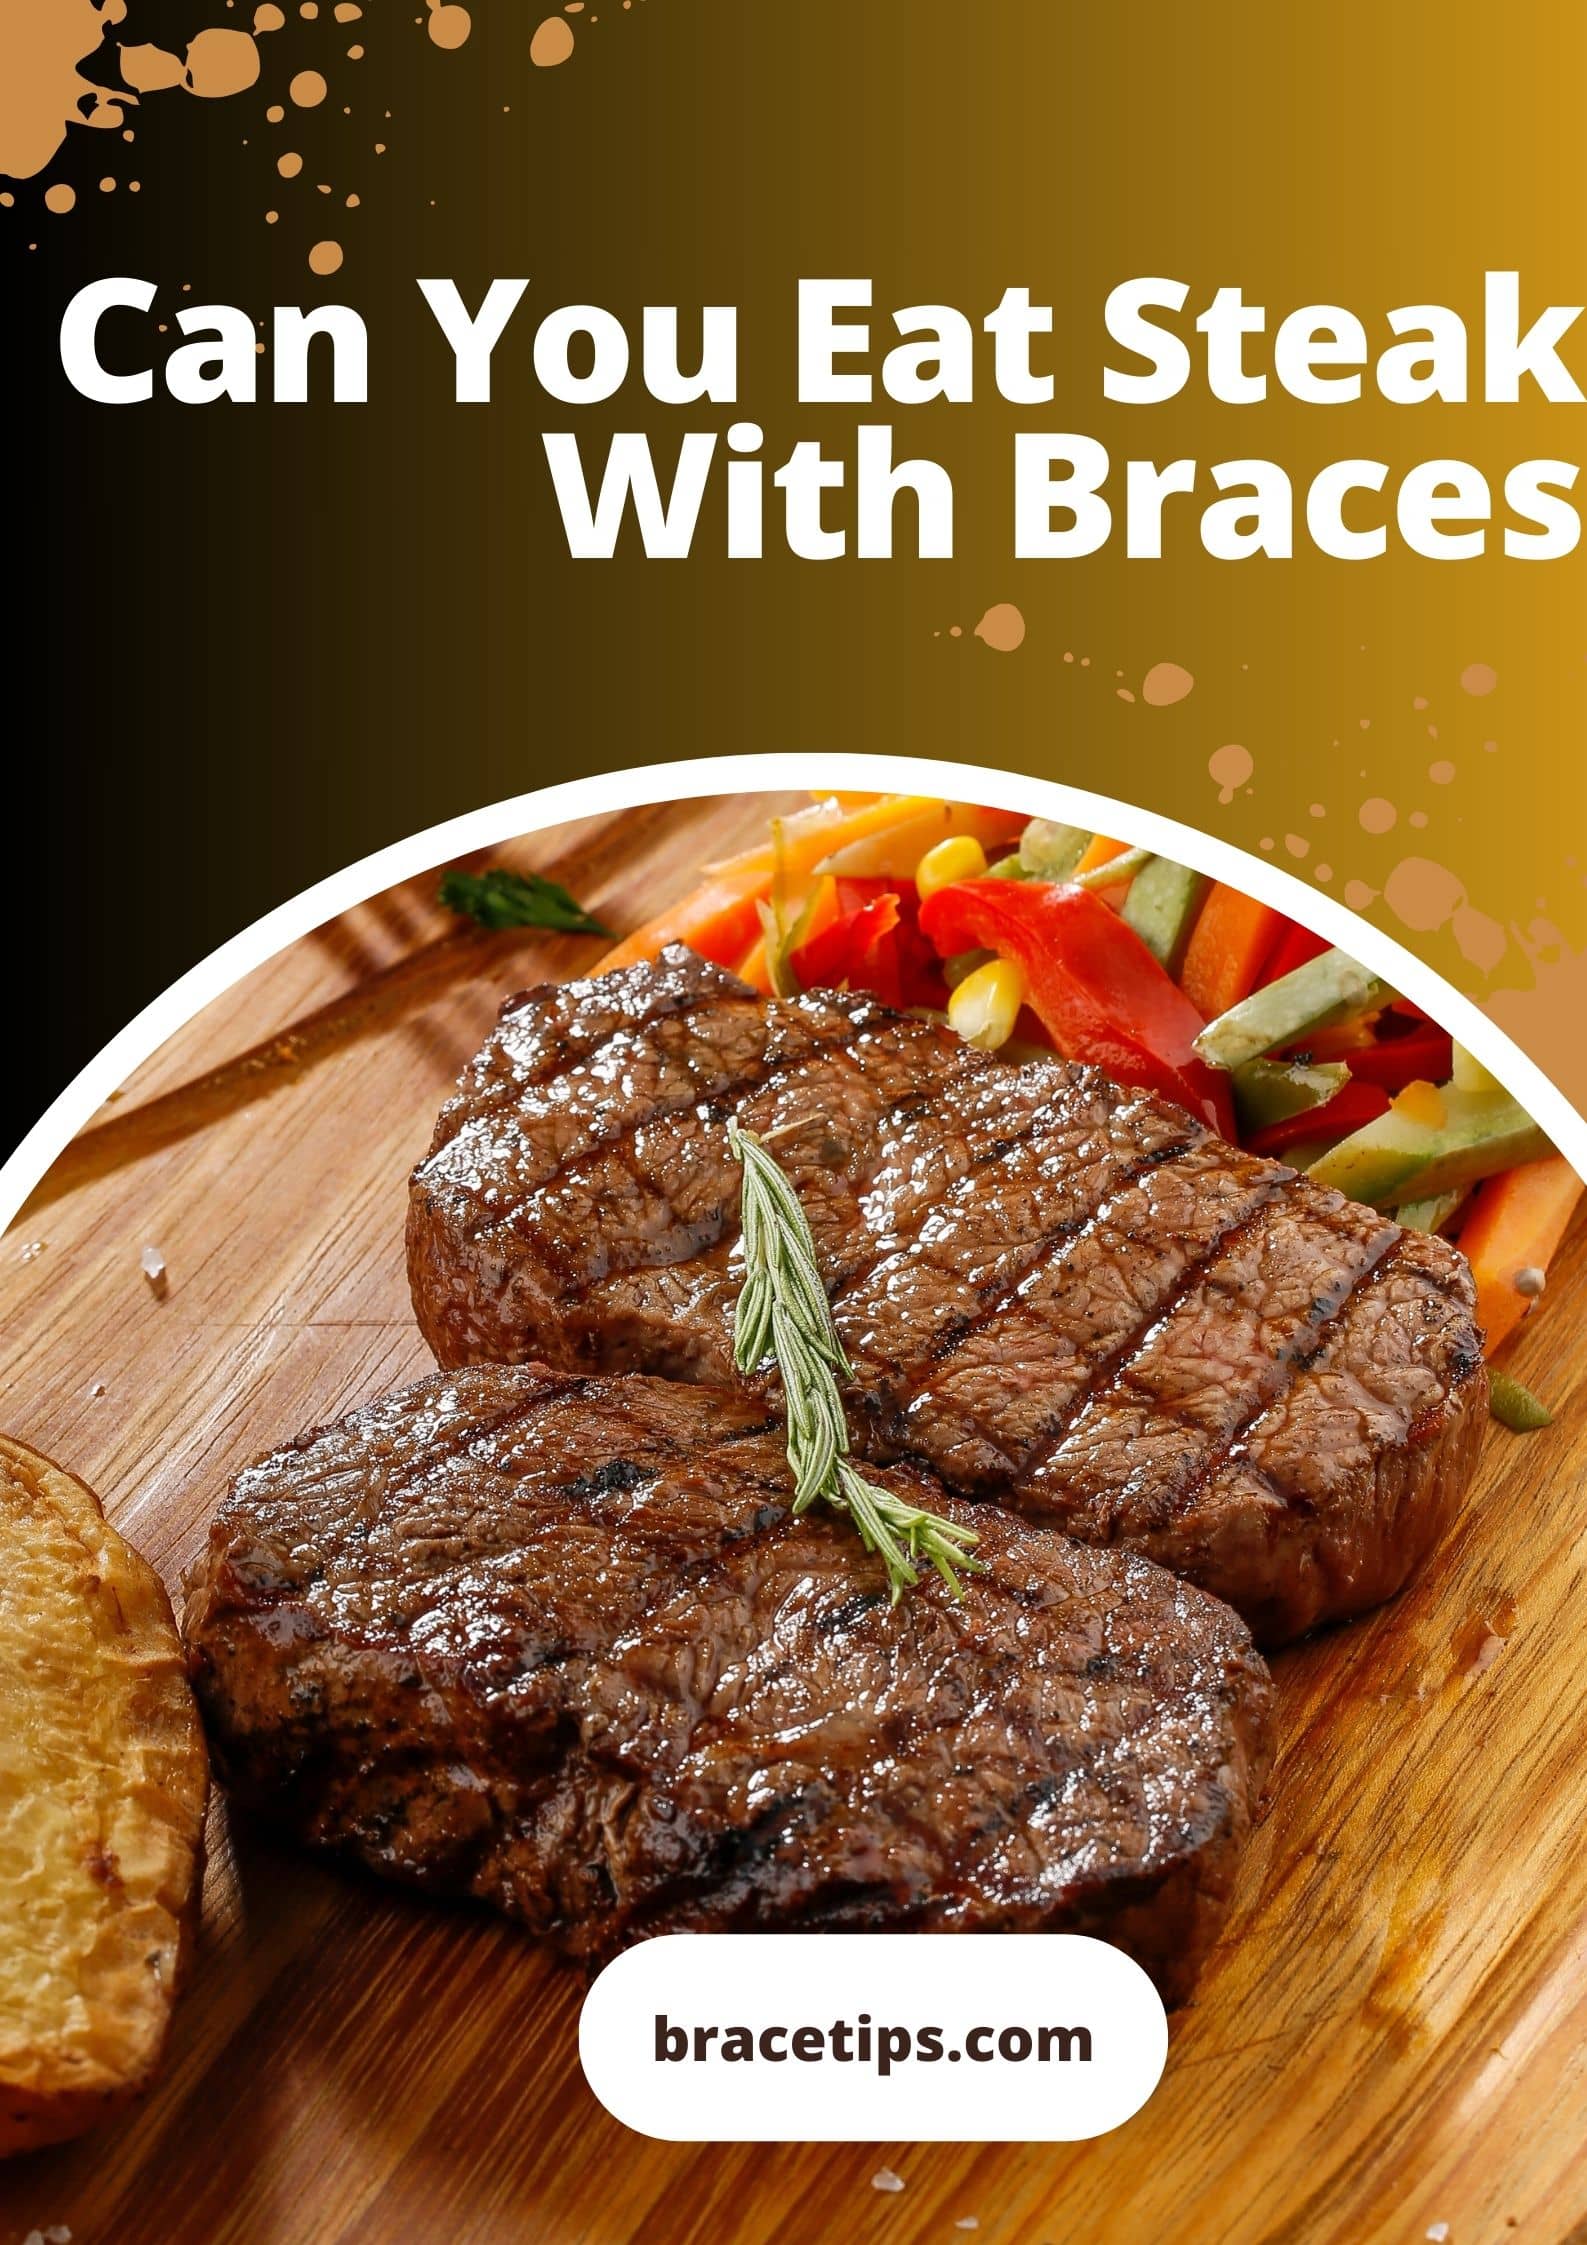 Can You Eat Steak With Braces